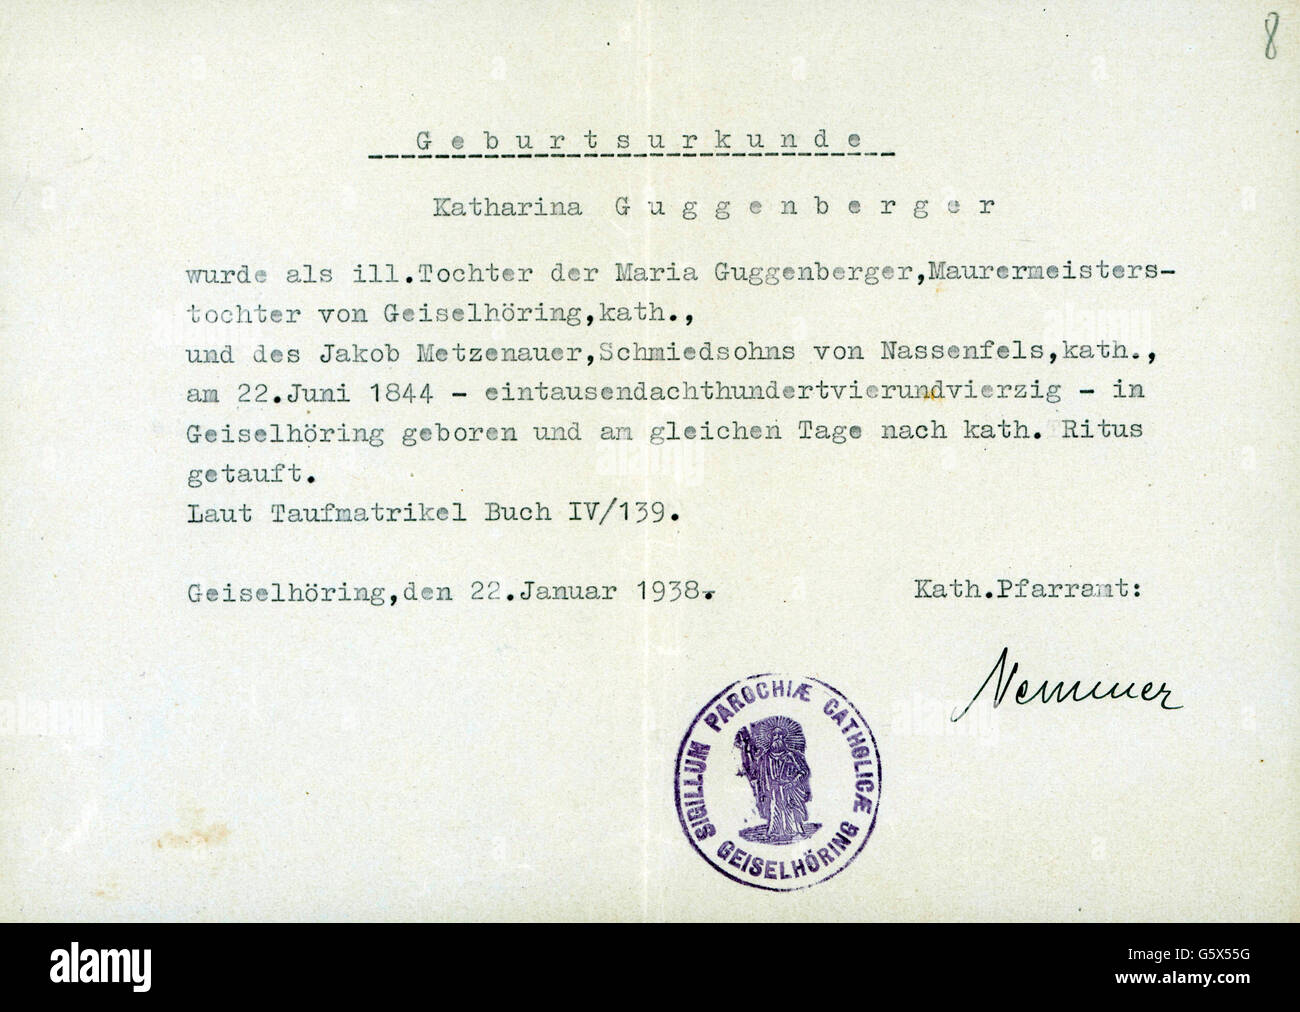 documents,birth certificate for Katharina Guggenberger,born on 22.6.1844,issued by Catholic Rectory,Geiselhöring,22.1.1938,19th century,20th century,1930s,30s,Germany,Lower Bavaria,religion,religions,Christianity,Catholicism,birth,births,birth certificate,birth certificates,christening,certificate of baptism,certificates of baptism,register,registers,stamp,stamps,signature,signatures,German Reich,Third Reich,Aryan certificate,documents,document,rectory,vicarage,parsonage,rectories,vicarages,parsonages,historic,historical,Additional-Rights-Clearences-Not Available Stock Photo